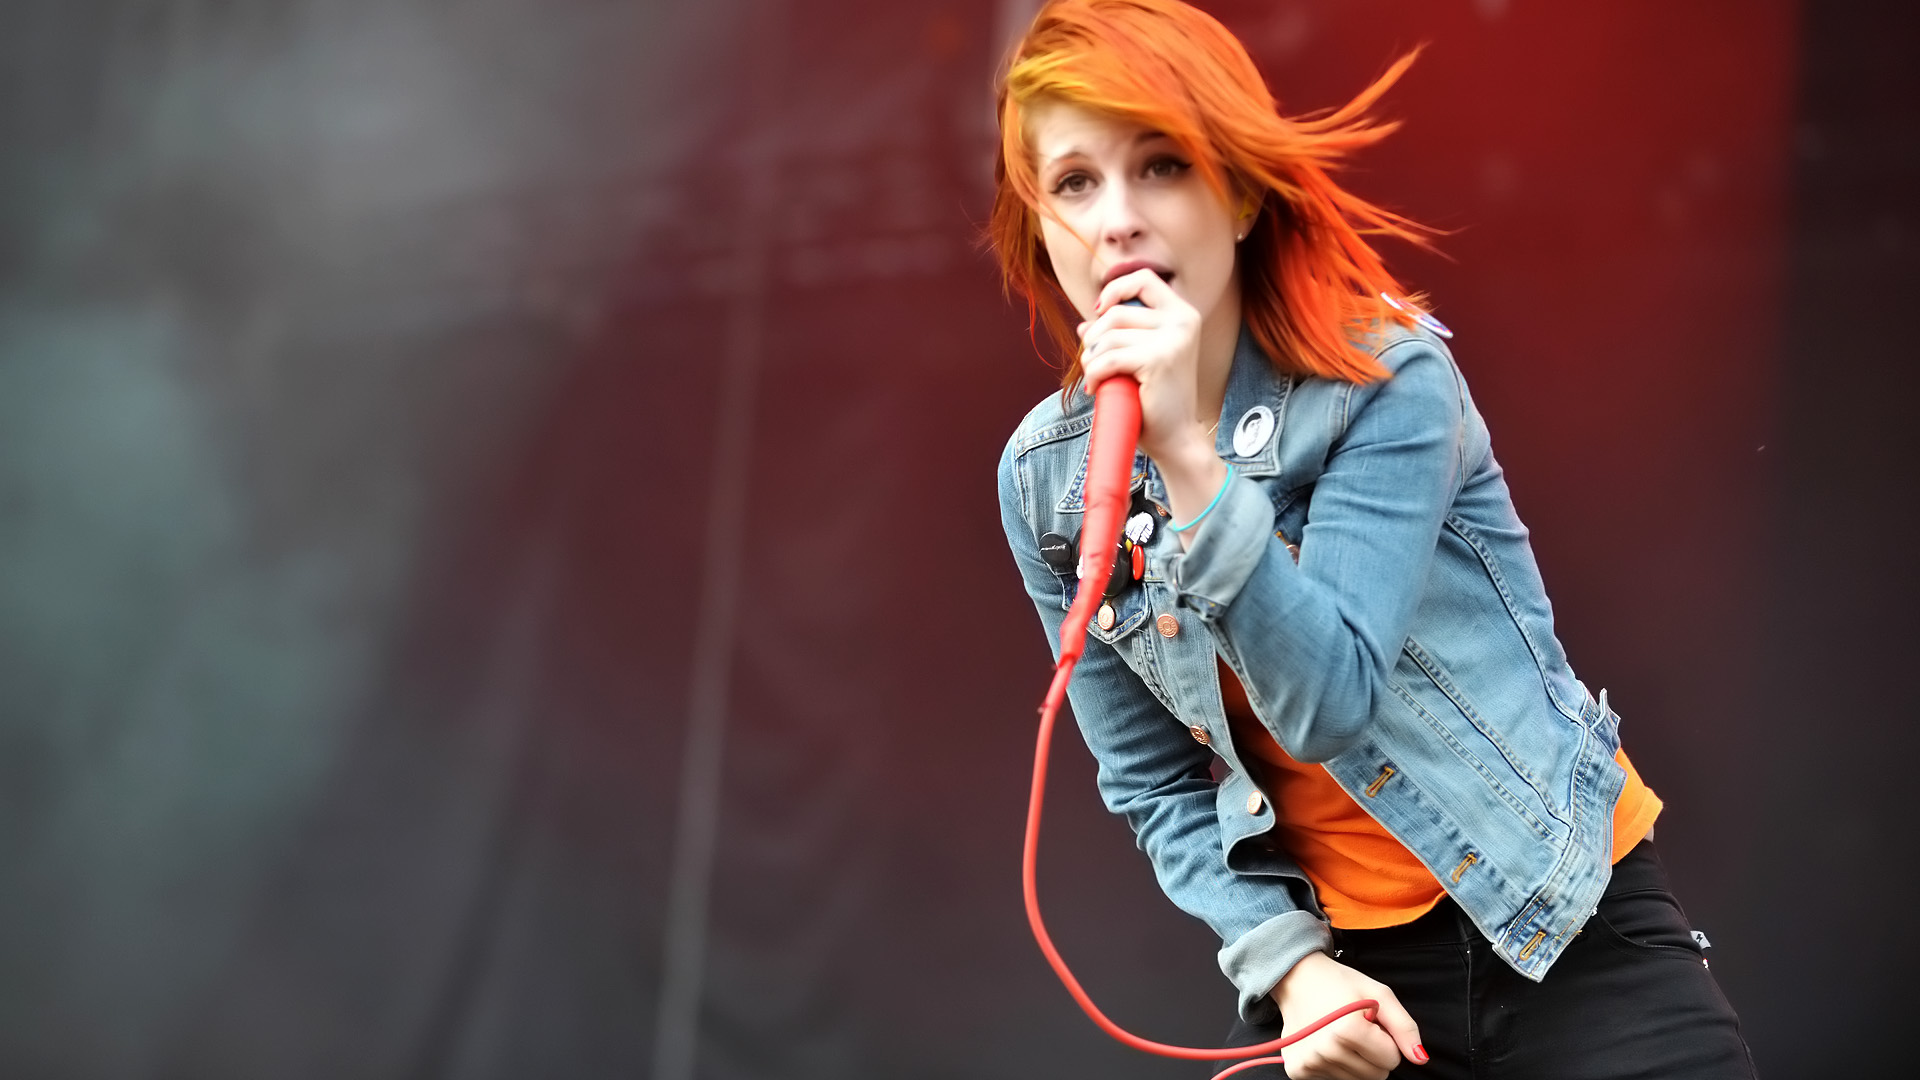 Wallpaper  Hayley Williams rock bands guitarist singing Paramore  entertainment stage 1366x768 px performance art performing arts  1366x768  4kWallpaper  596416  HD Wallpapers  WallHere